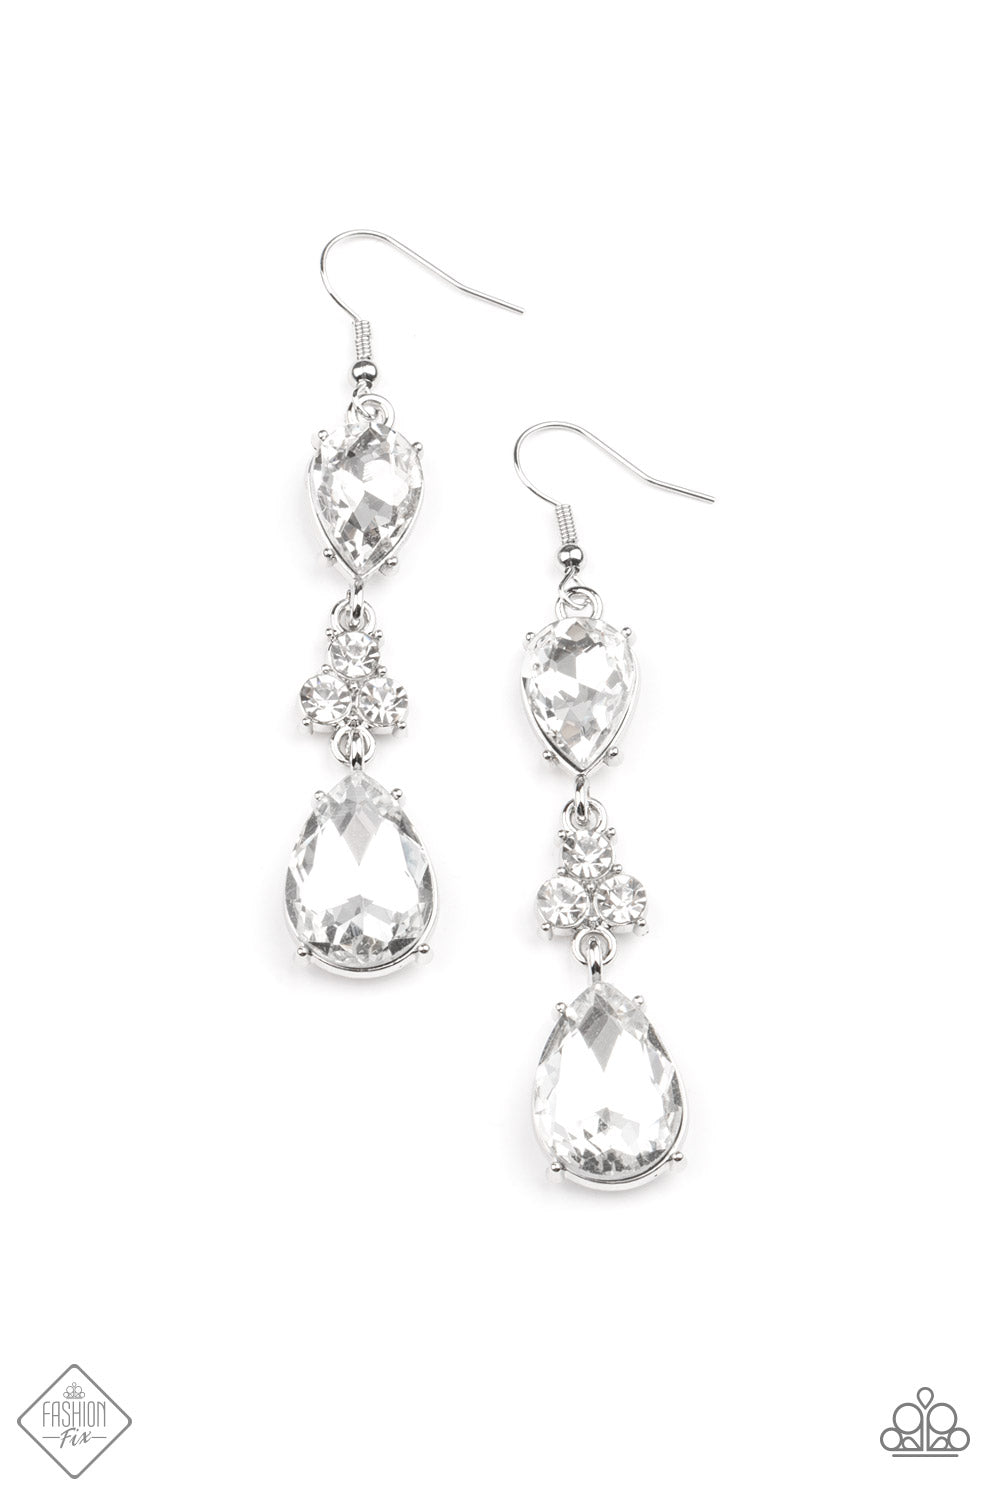 Once Upon a Twinkle - Silver Earrings - Paparazzi Accessories -
A trio of dazzling white rhinestones unites two white teardrop gems as they dangle brilliantly from the ear for a flawless finish. Earring attaches to a standard fishhook fitting. Sold as one pair of earrings.
